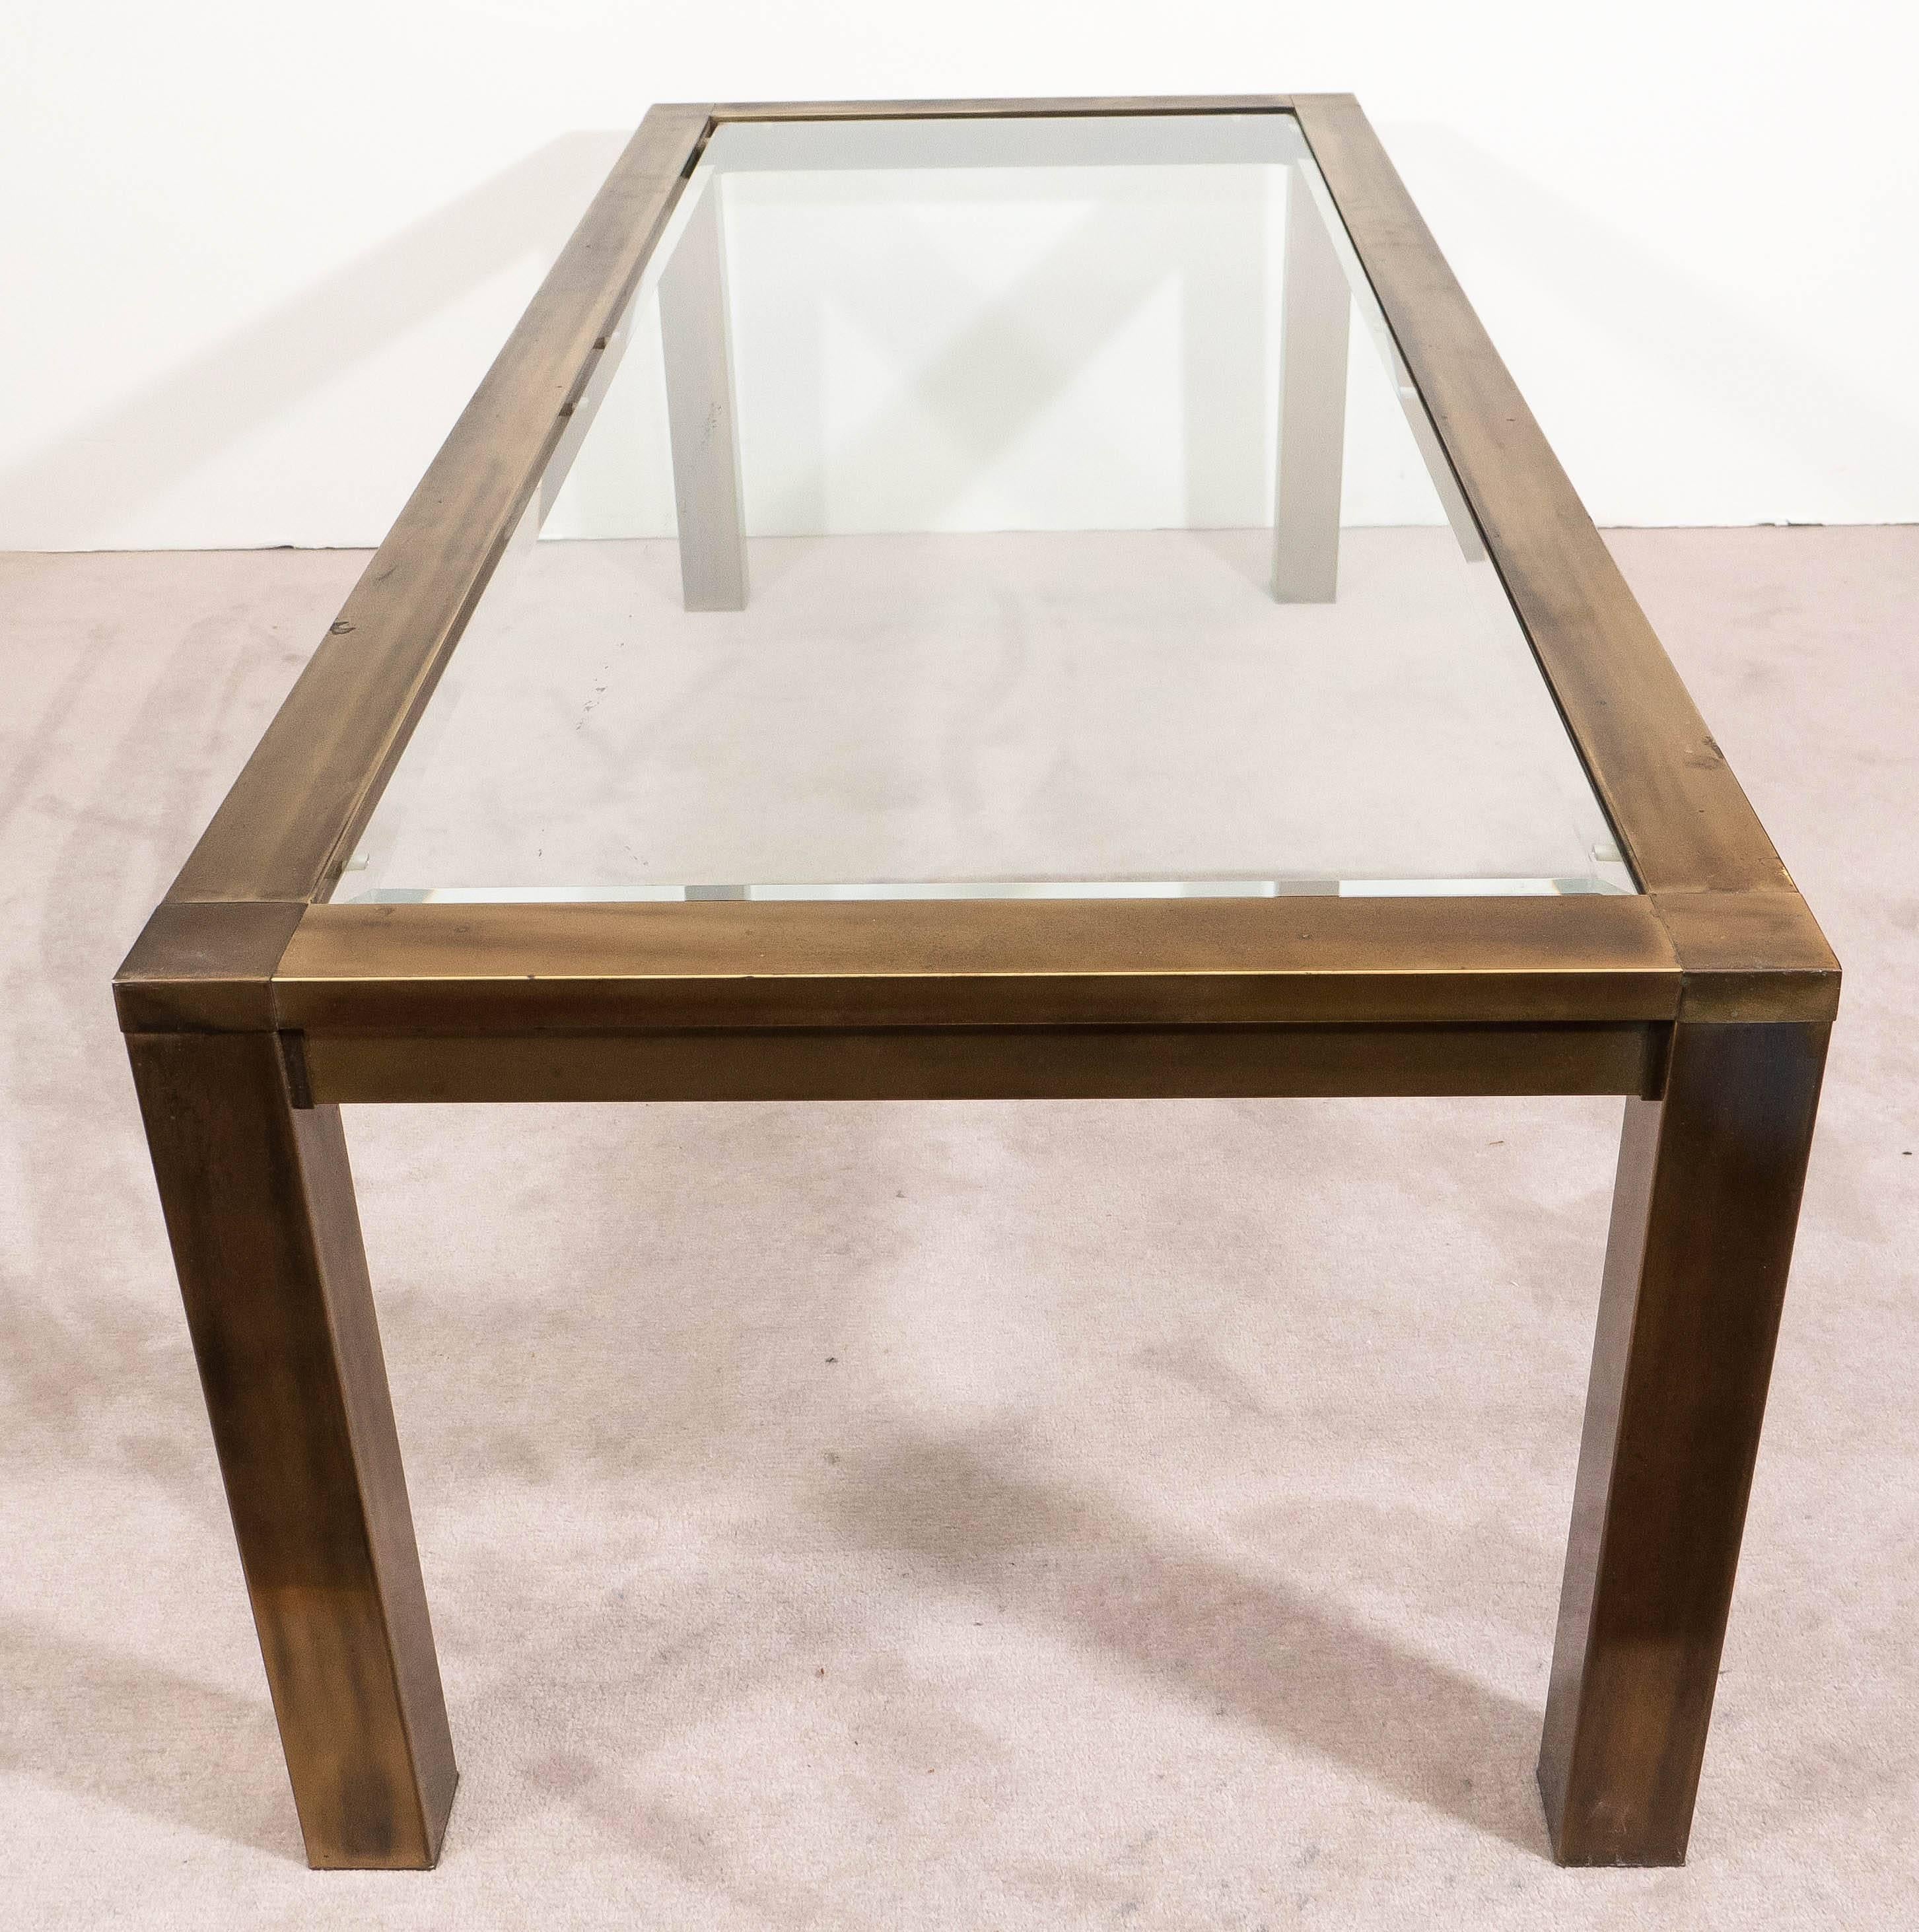 A vintage coffee or cocktail table, produced, circa 1970s by Mastercraft, with brass frame, inset with glass top, on rectangular legs. Good condition, with age appropriate wear, nice patina to the brass surface. 9001.